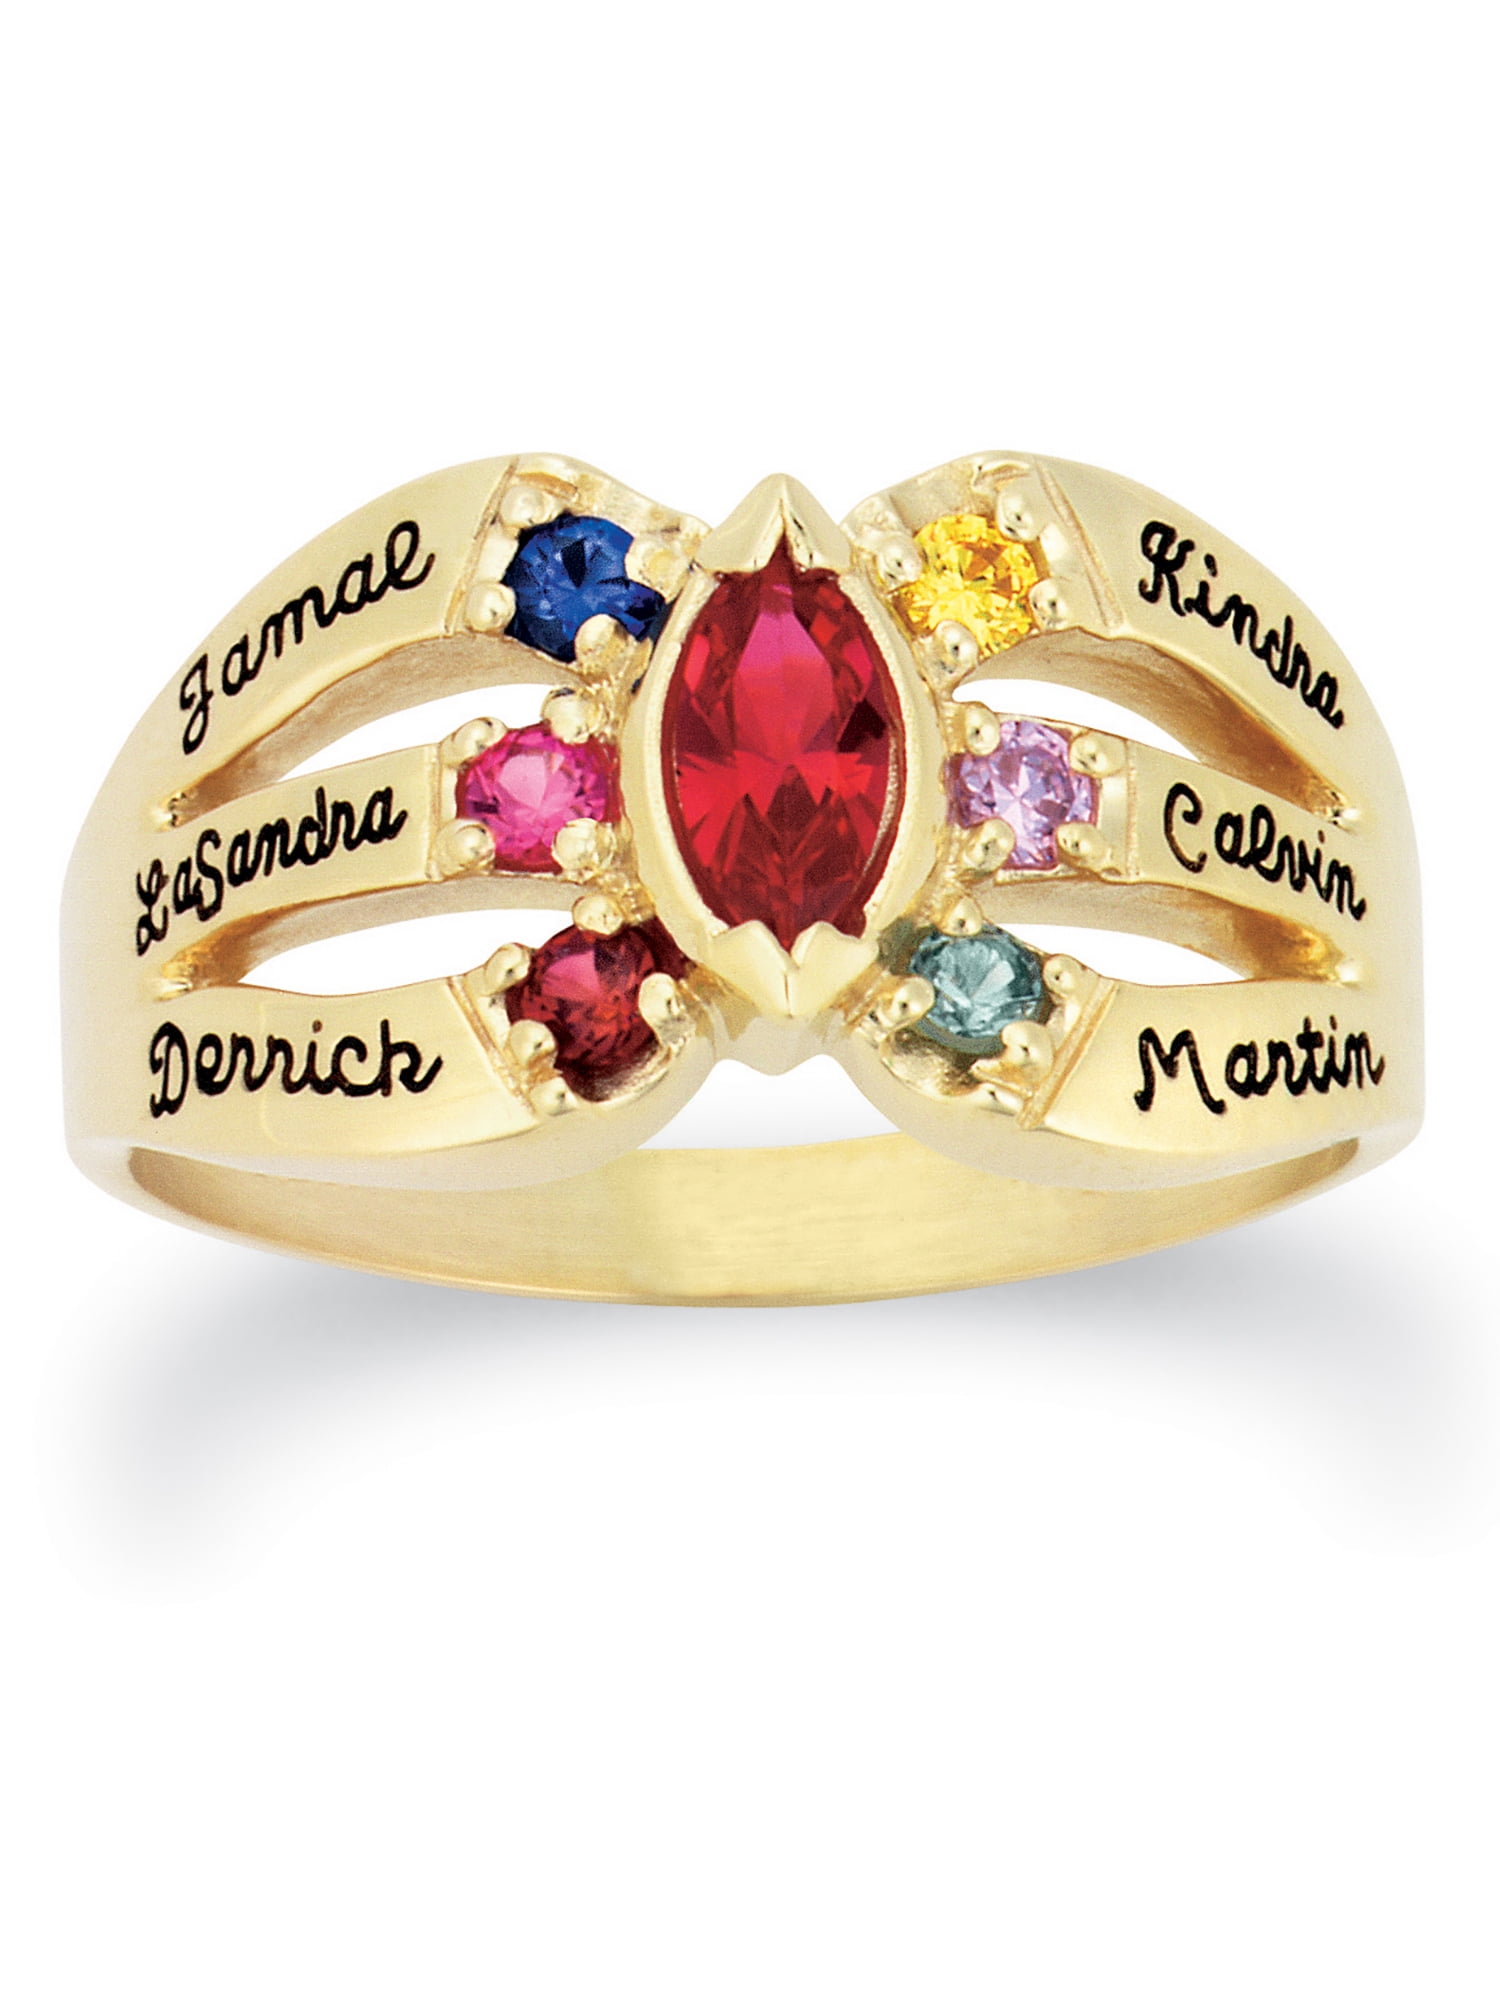 Keepsake Personalized Family Jewelry Everlasting Mother's Birthstone Ring available in Gold